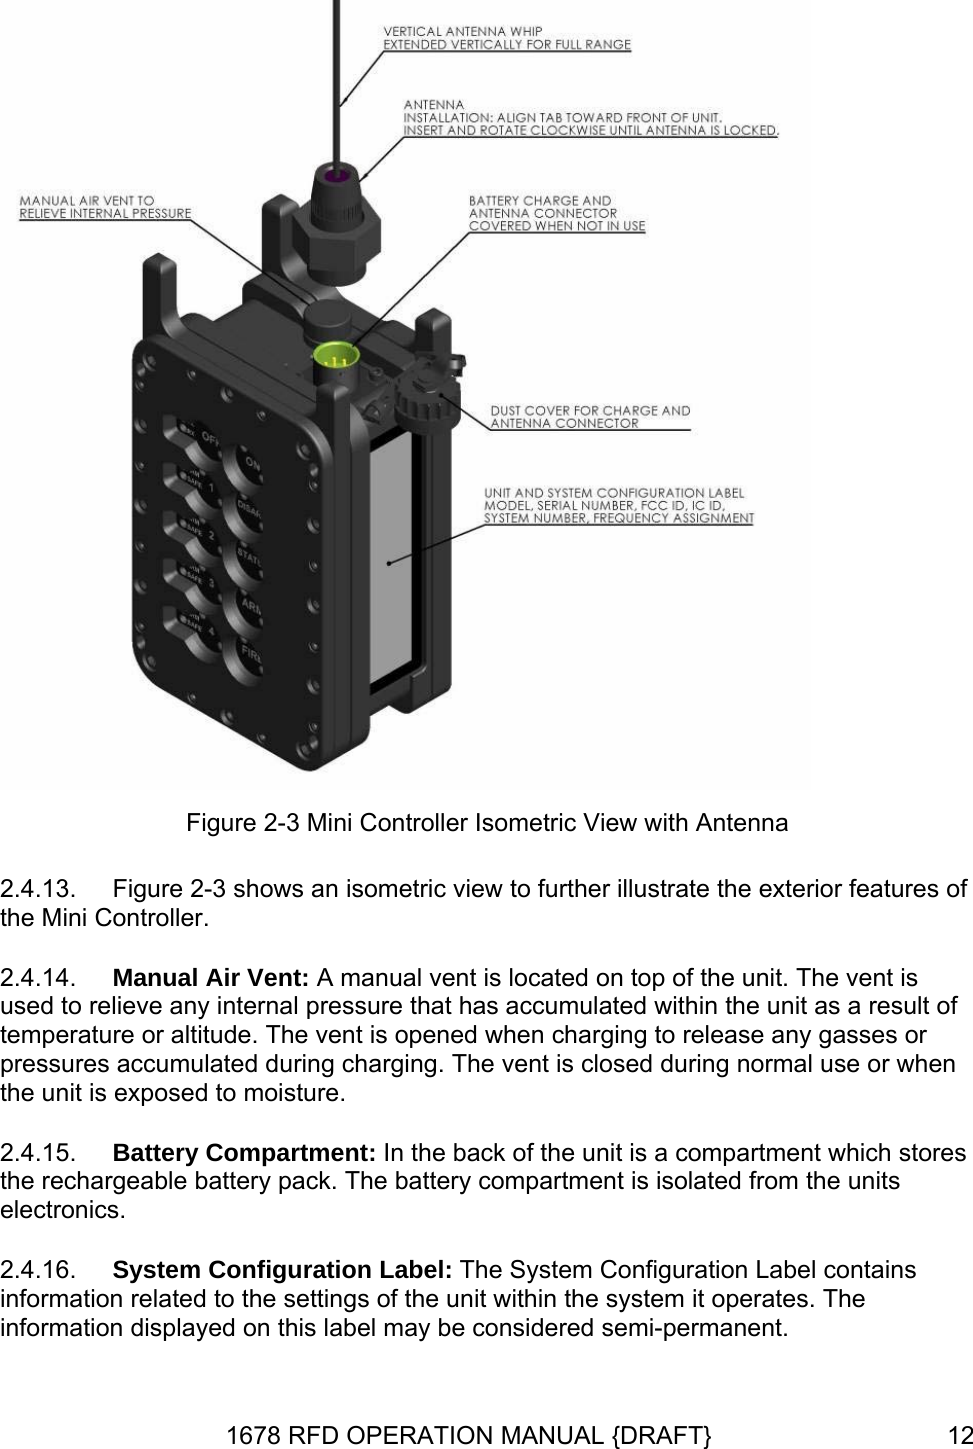  Figure 2-3 Mini Controller Isometric View with Antenna 2.4.13. 2.4.14. 2.4.15. 2.4.16. Figure 2-3 shows an isometric view to further illustrate the exterior features of the Mini Controller. Manual Air Vent: A manual vent is located on top of the unit. The vent is used to relieve any internal pressure that has accumulated within the unit as a result of temperature or altitude. The vent is opened when charging to release any gasses or pressures accumulated during charging. The vent is closed during normal use or when the unit is exposed to moisture. Battery Compartment: In the back of the unit is a compartment which stores the rechargeable battery pack. The battery compartment is isolated from the units electronics. System Configuration Label: The System Configuration Label contains information related to the settings of the unit within the system it operates. The information displayed on this label may be considered semi-permanent. 1678 RFD OPERATION MANUAL {DRAFT}  12